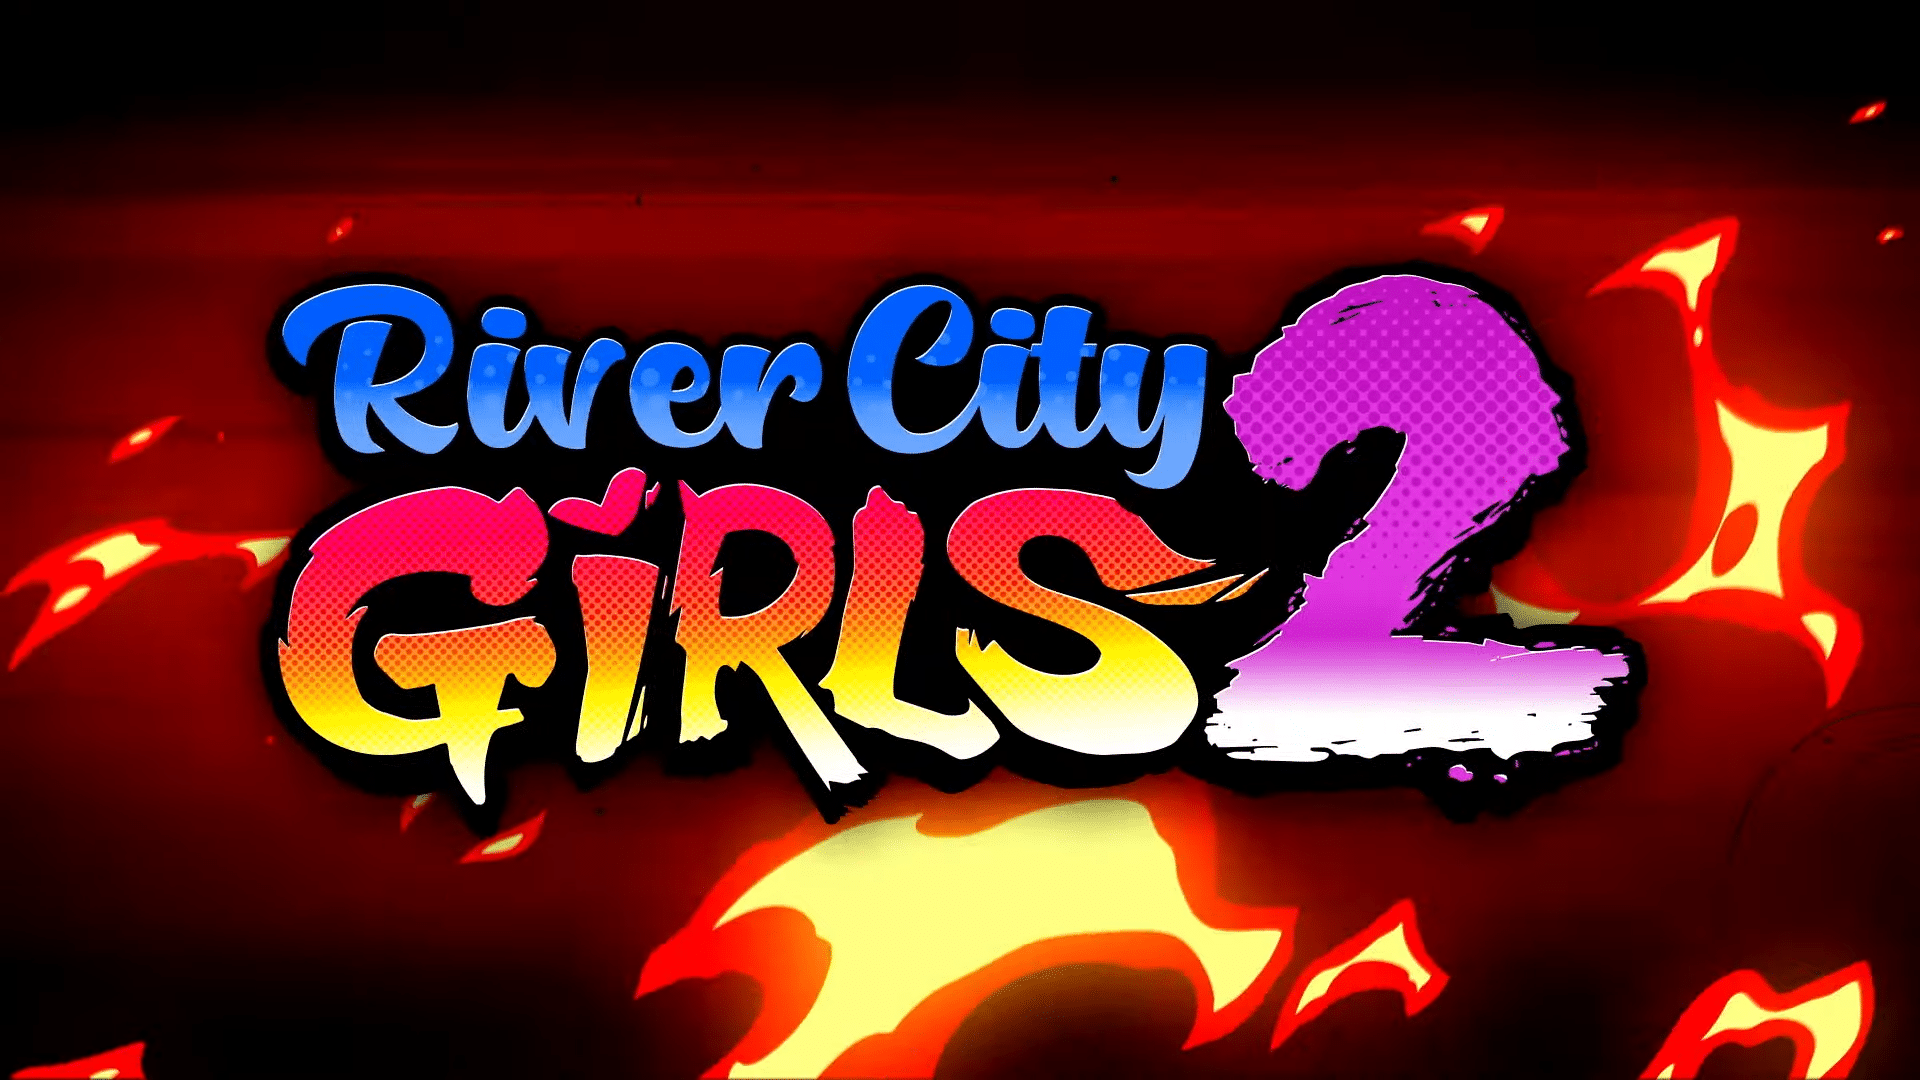 River City Girls 2 Receives First Trailer Highlighting Playable Cast and Fast-Paced Brawling; PS5, PS4, Xbox One, Xbox Series X|S, Switch, and PC